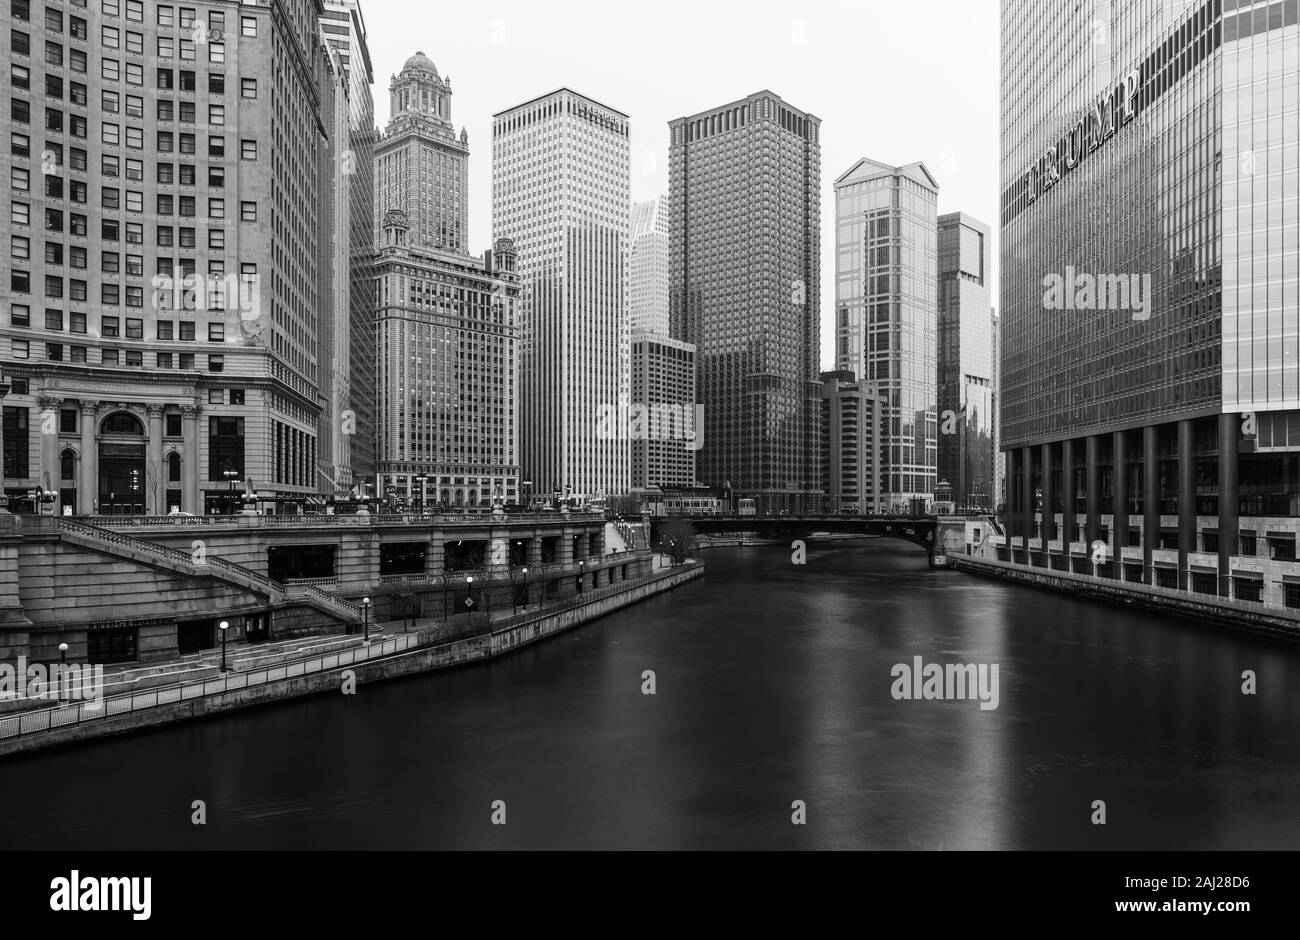 Chicago - March 2017, IL, USA: Black and white photo of Chicago downtown with skyscrapers, hotels, promenade and river viewed from the bridge Stock Photo